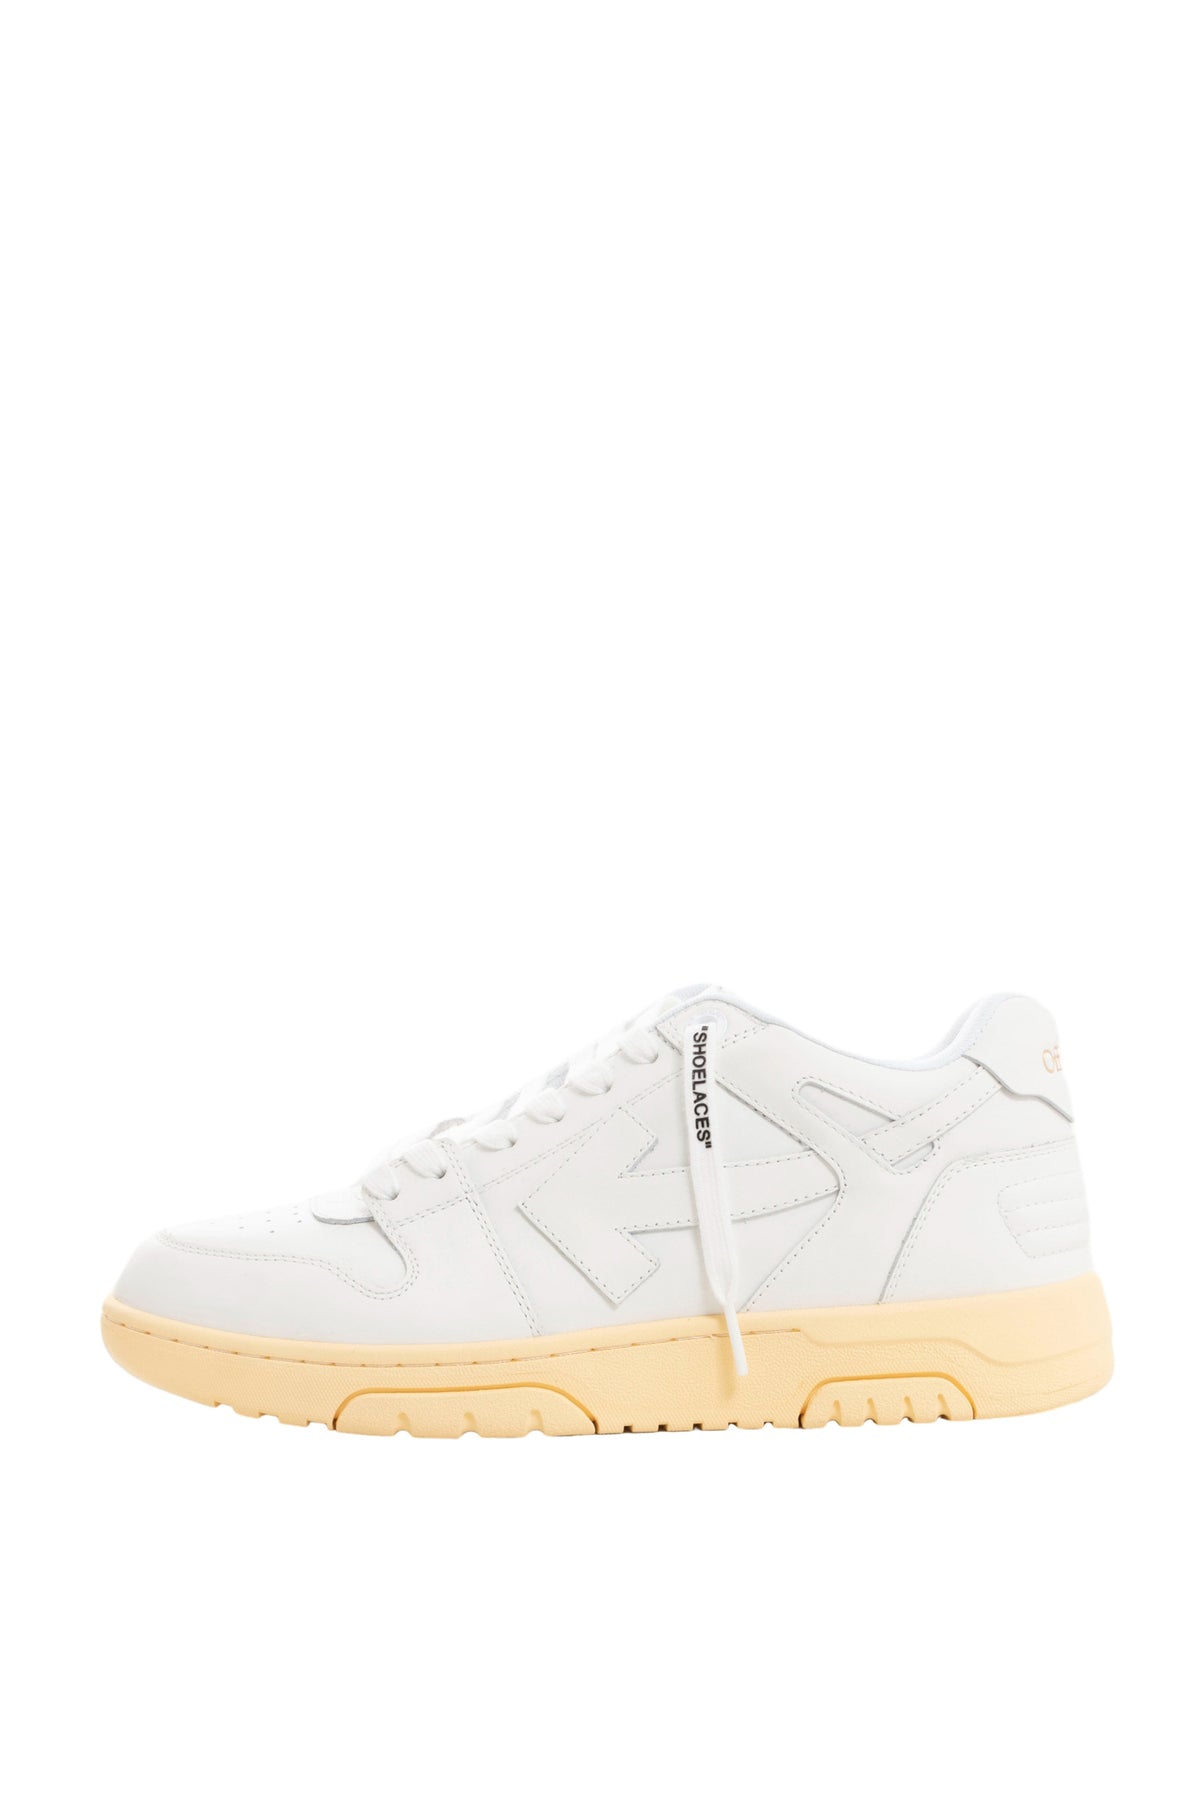 OUT OF OFFICE CALF LEATHER / WHT WHT